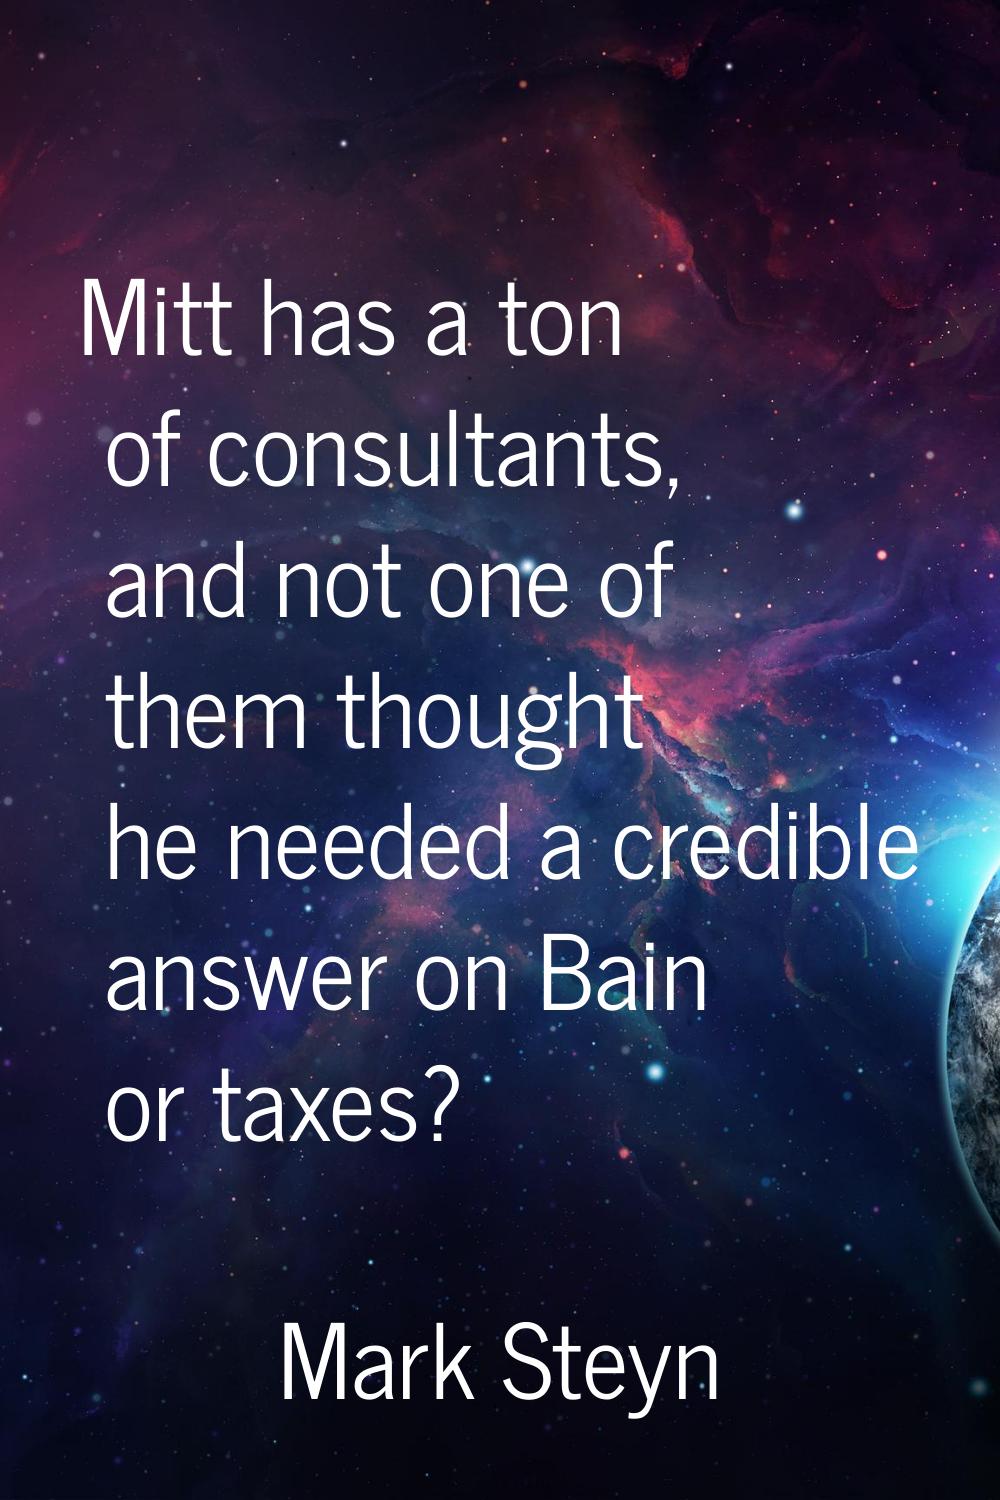 Mitt has a ton of consultants, and not one of them thought he needed a credible answer on Bain or t